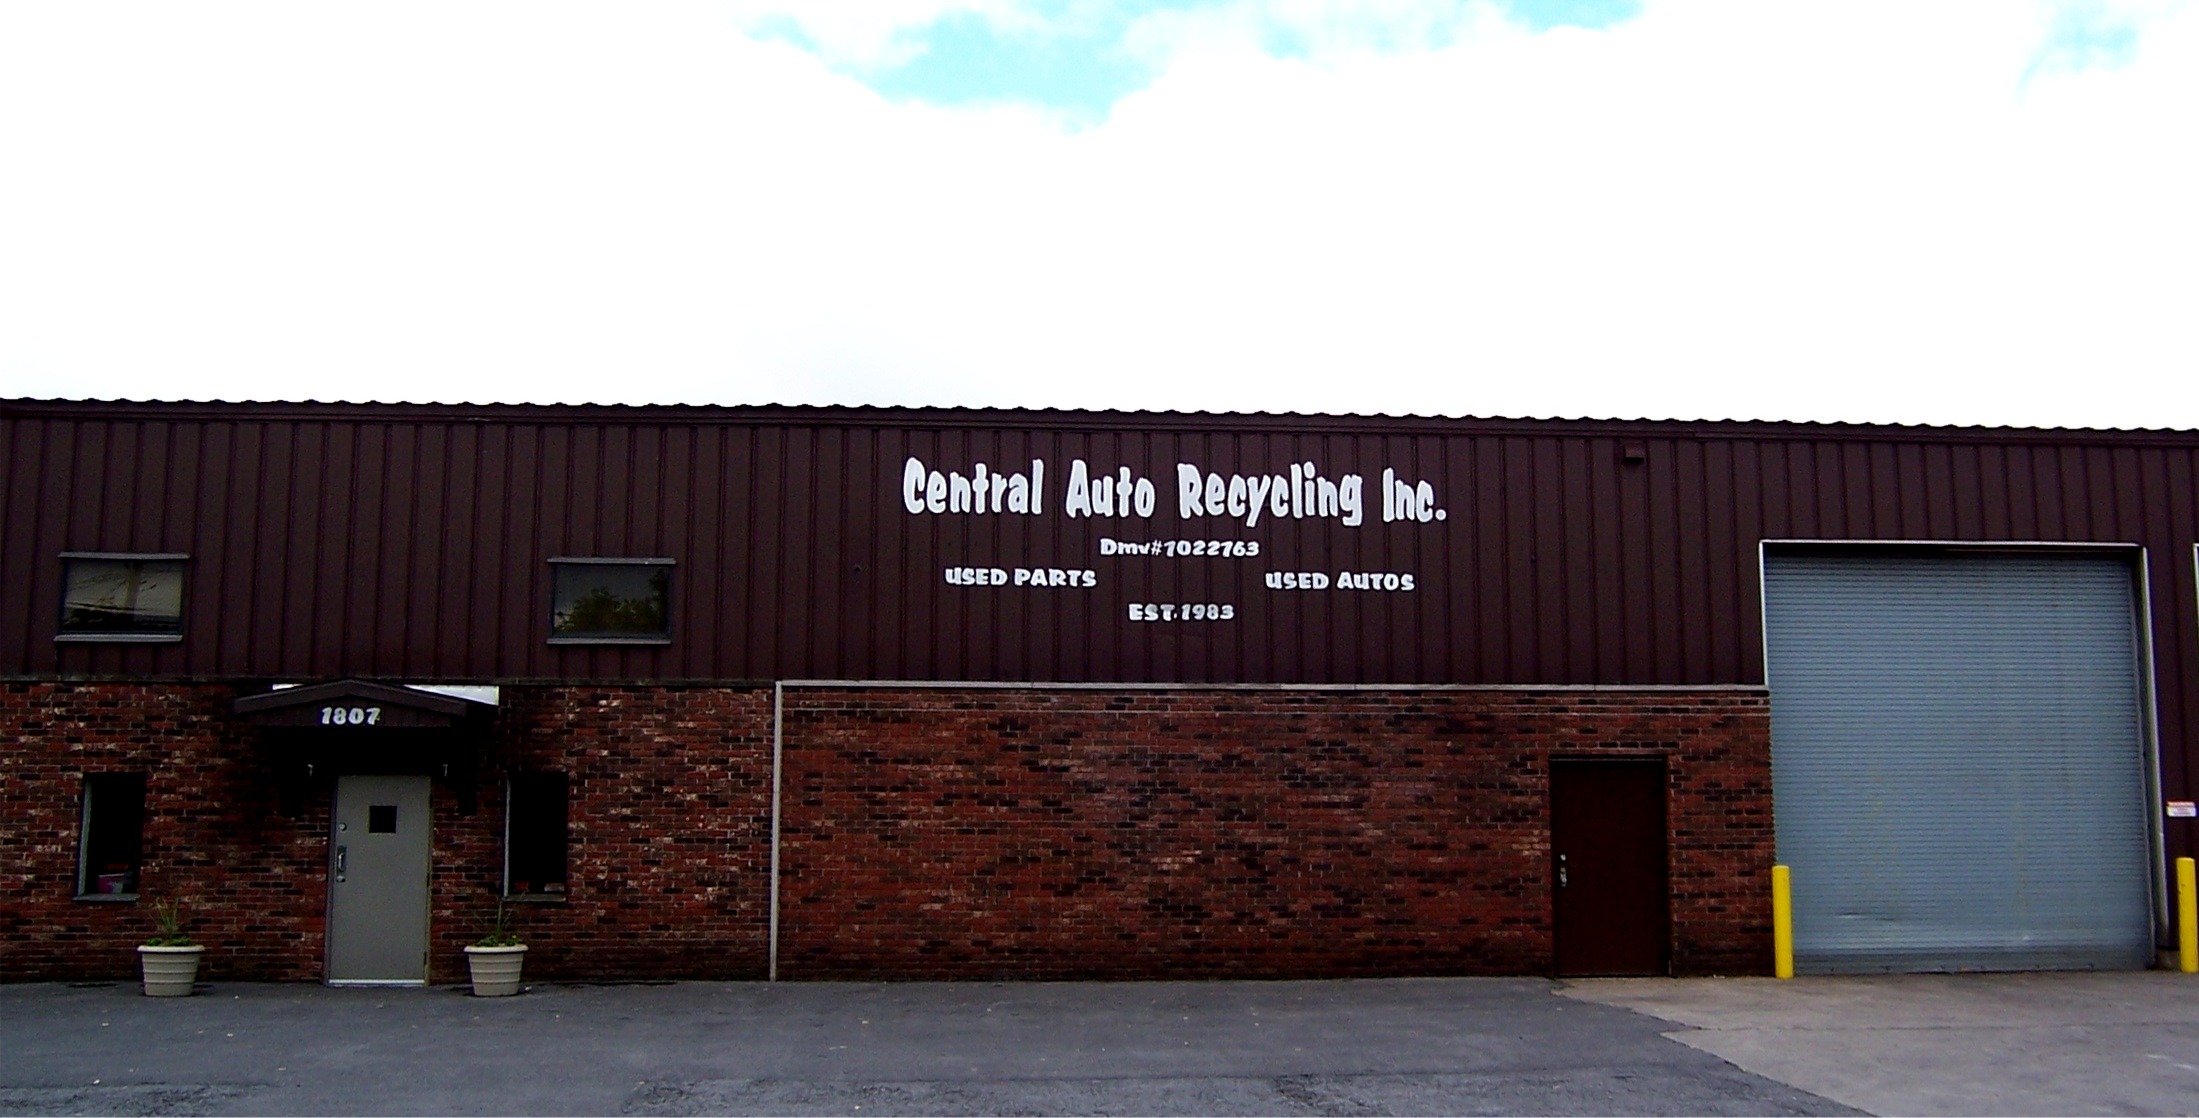 Central Auto Recycling, Inc. Home Office and Headquarters